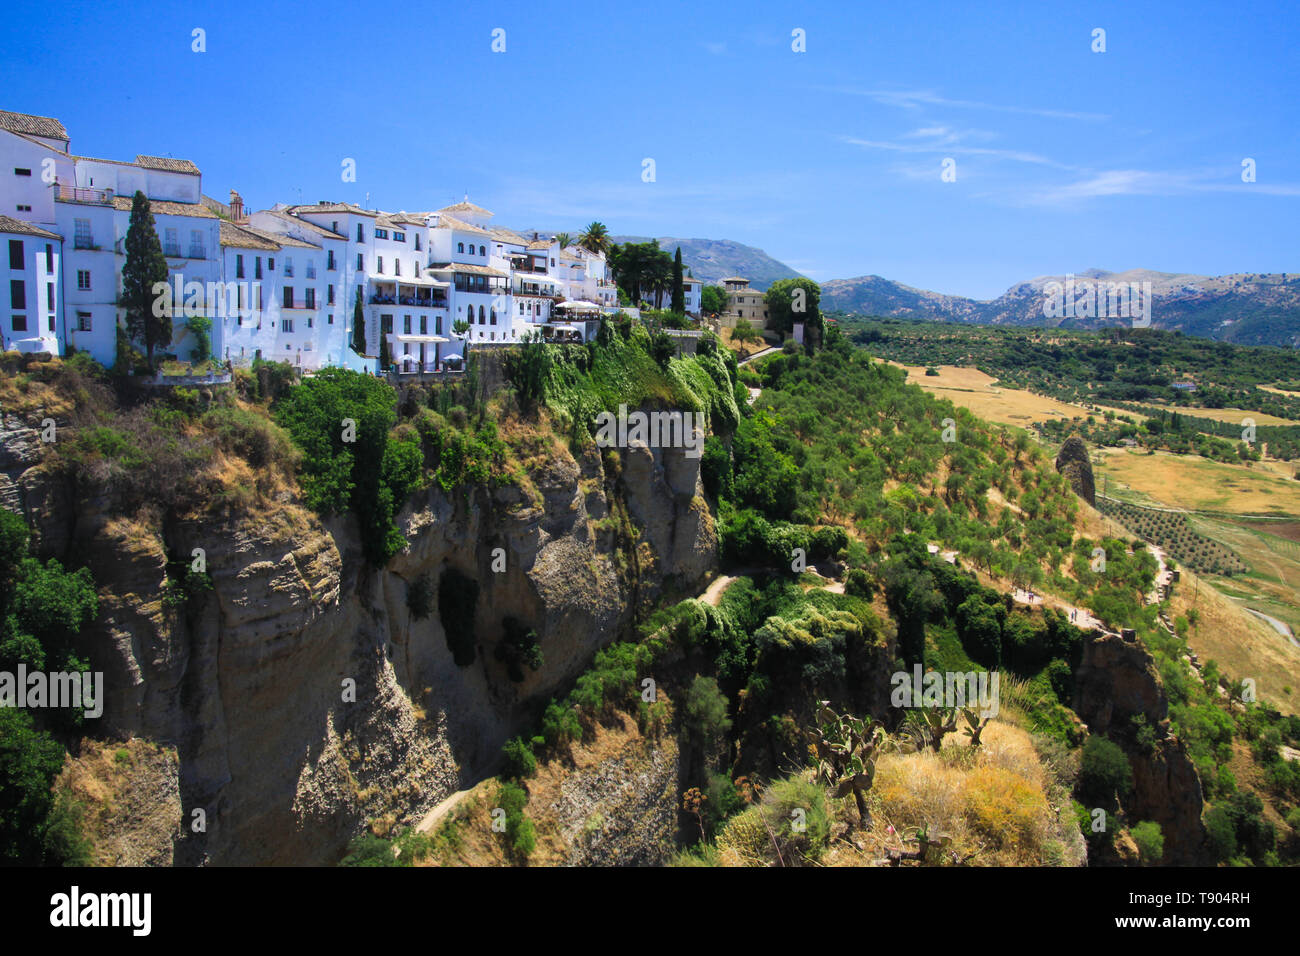 View on ancient village Ronda located on plateau surrounded by rural plains in Andalusia, Spain Stock Photo